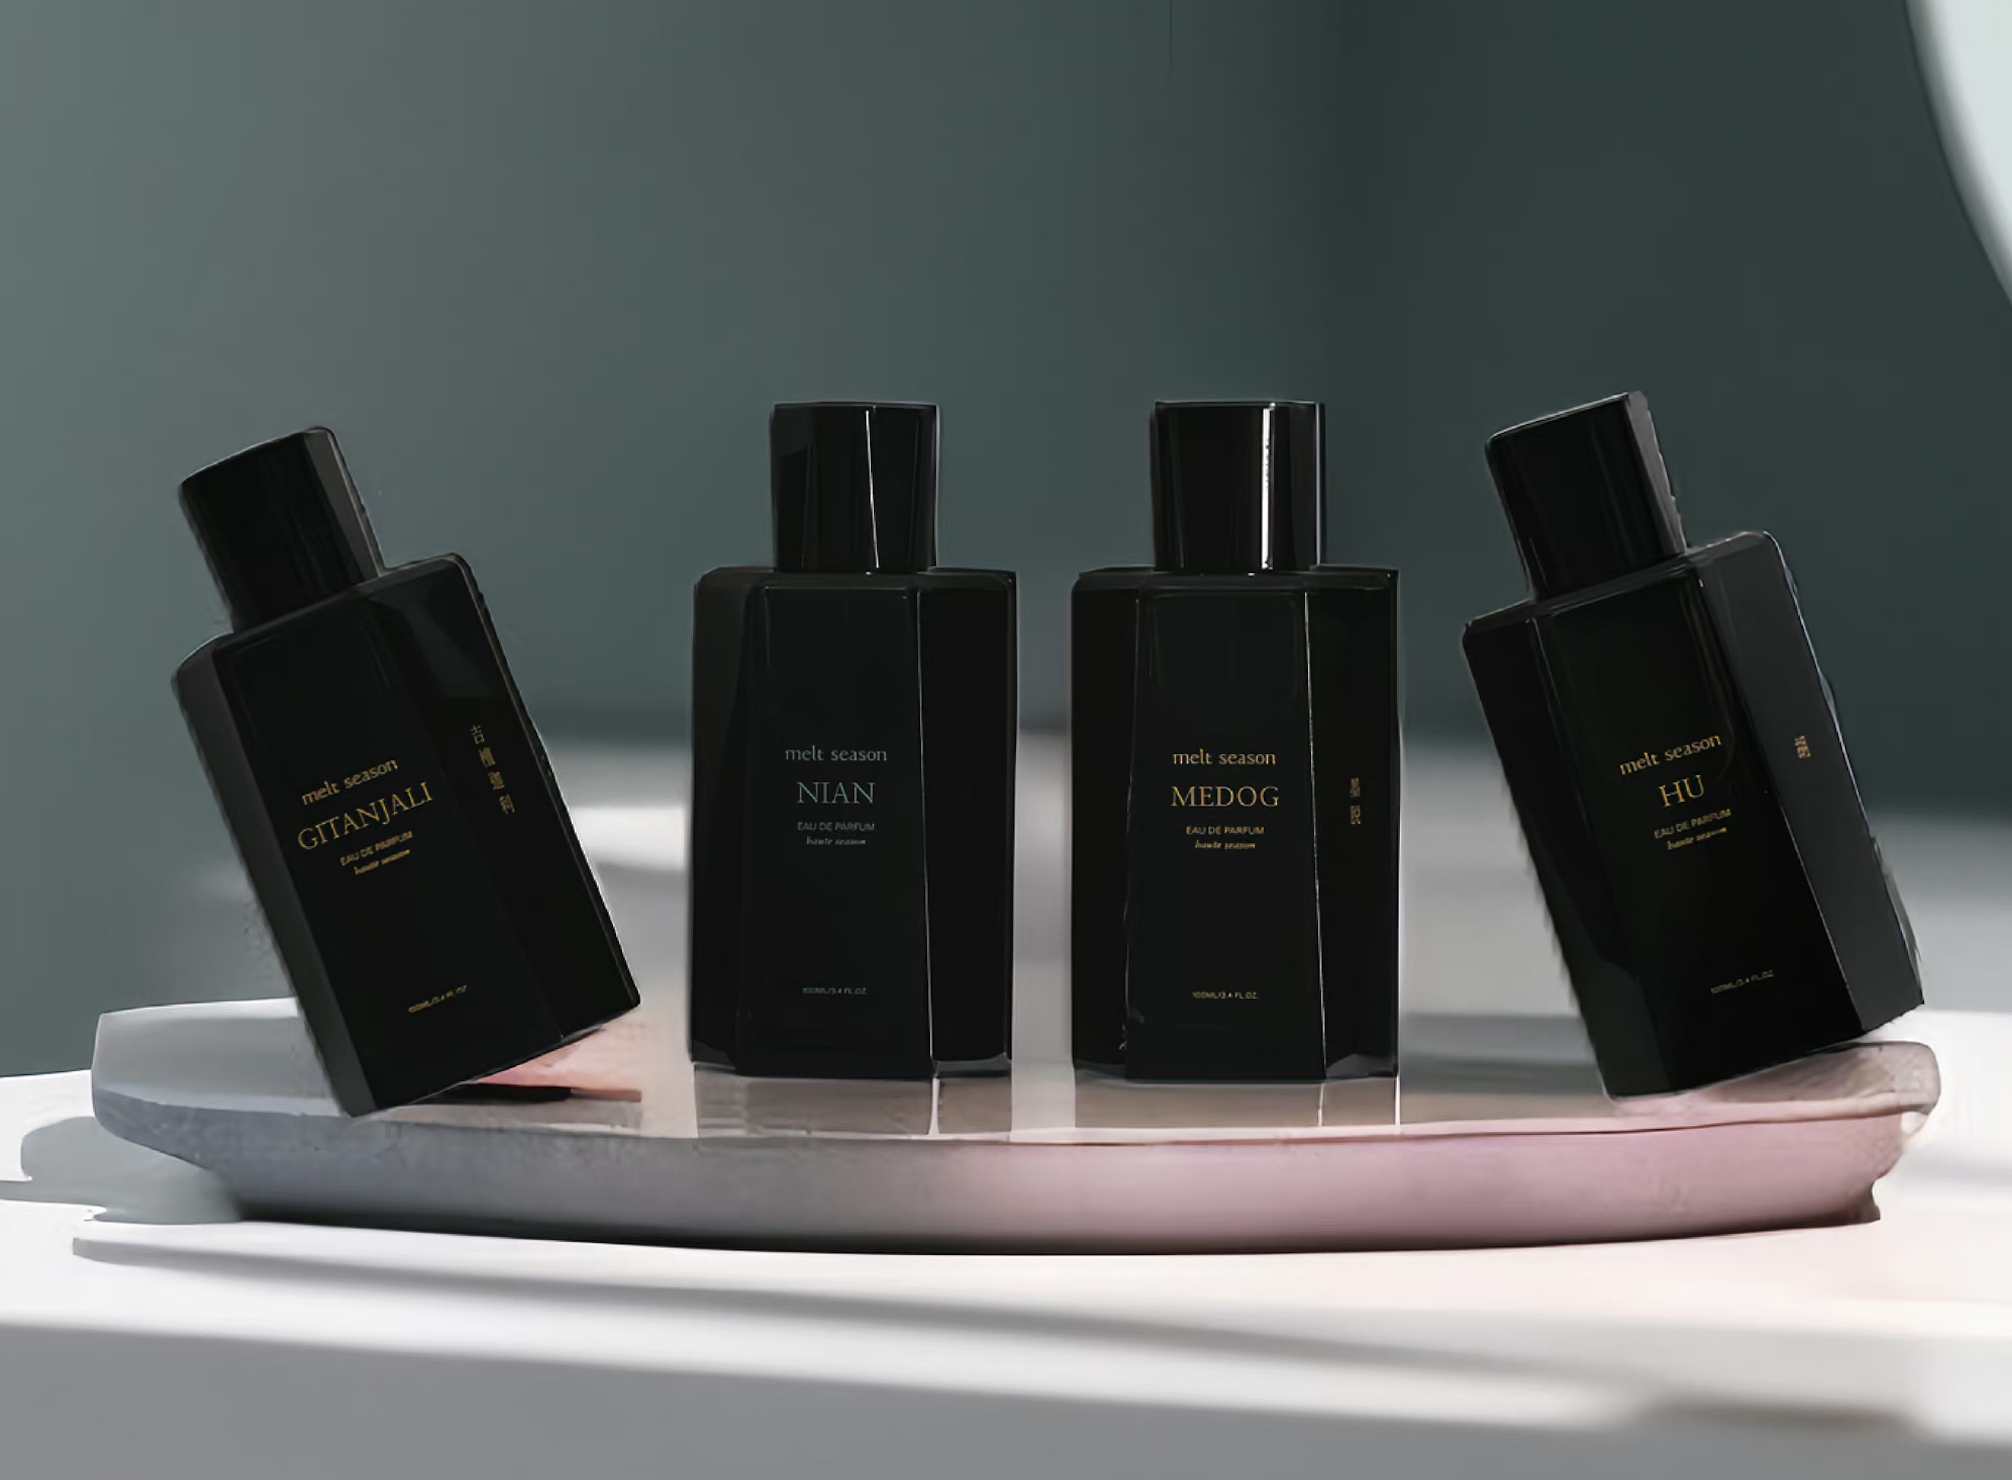 Following the footsteps of L’Oréal and LVMH’s L Catterton, Estée Lauder is taking a stake in a Chinese luxury fragrance brand. Photo: Melt Season Weibo